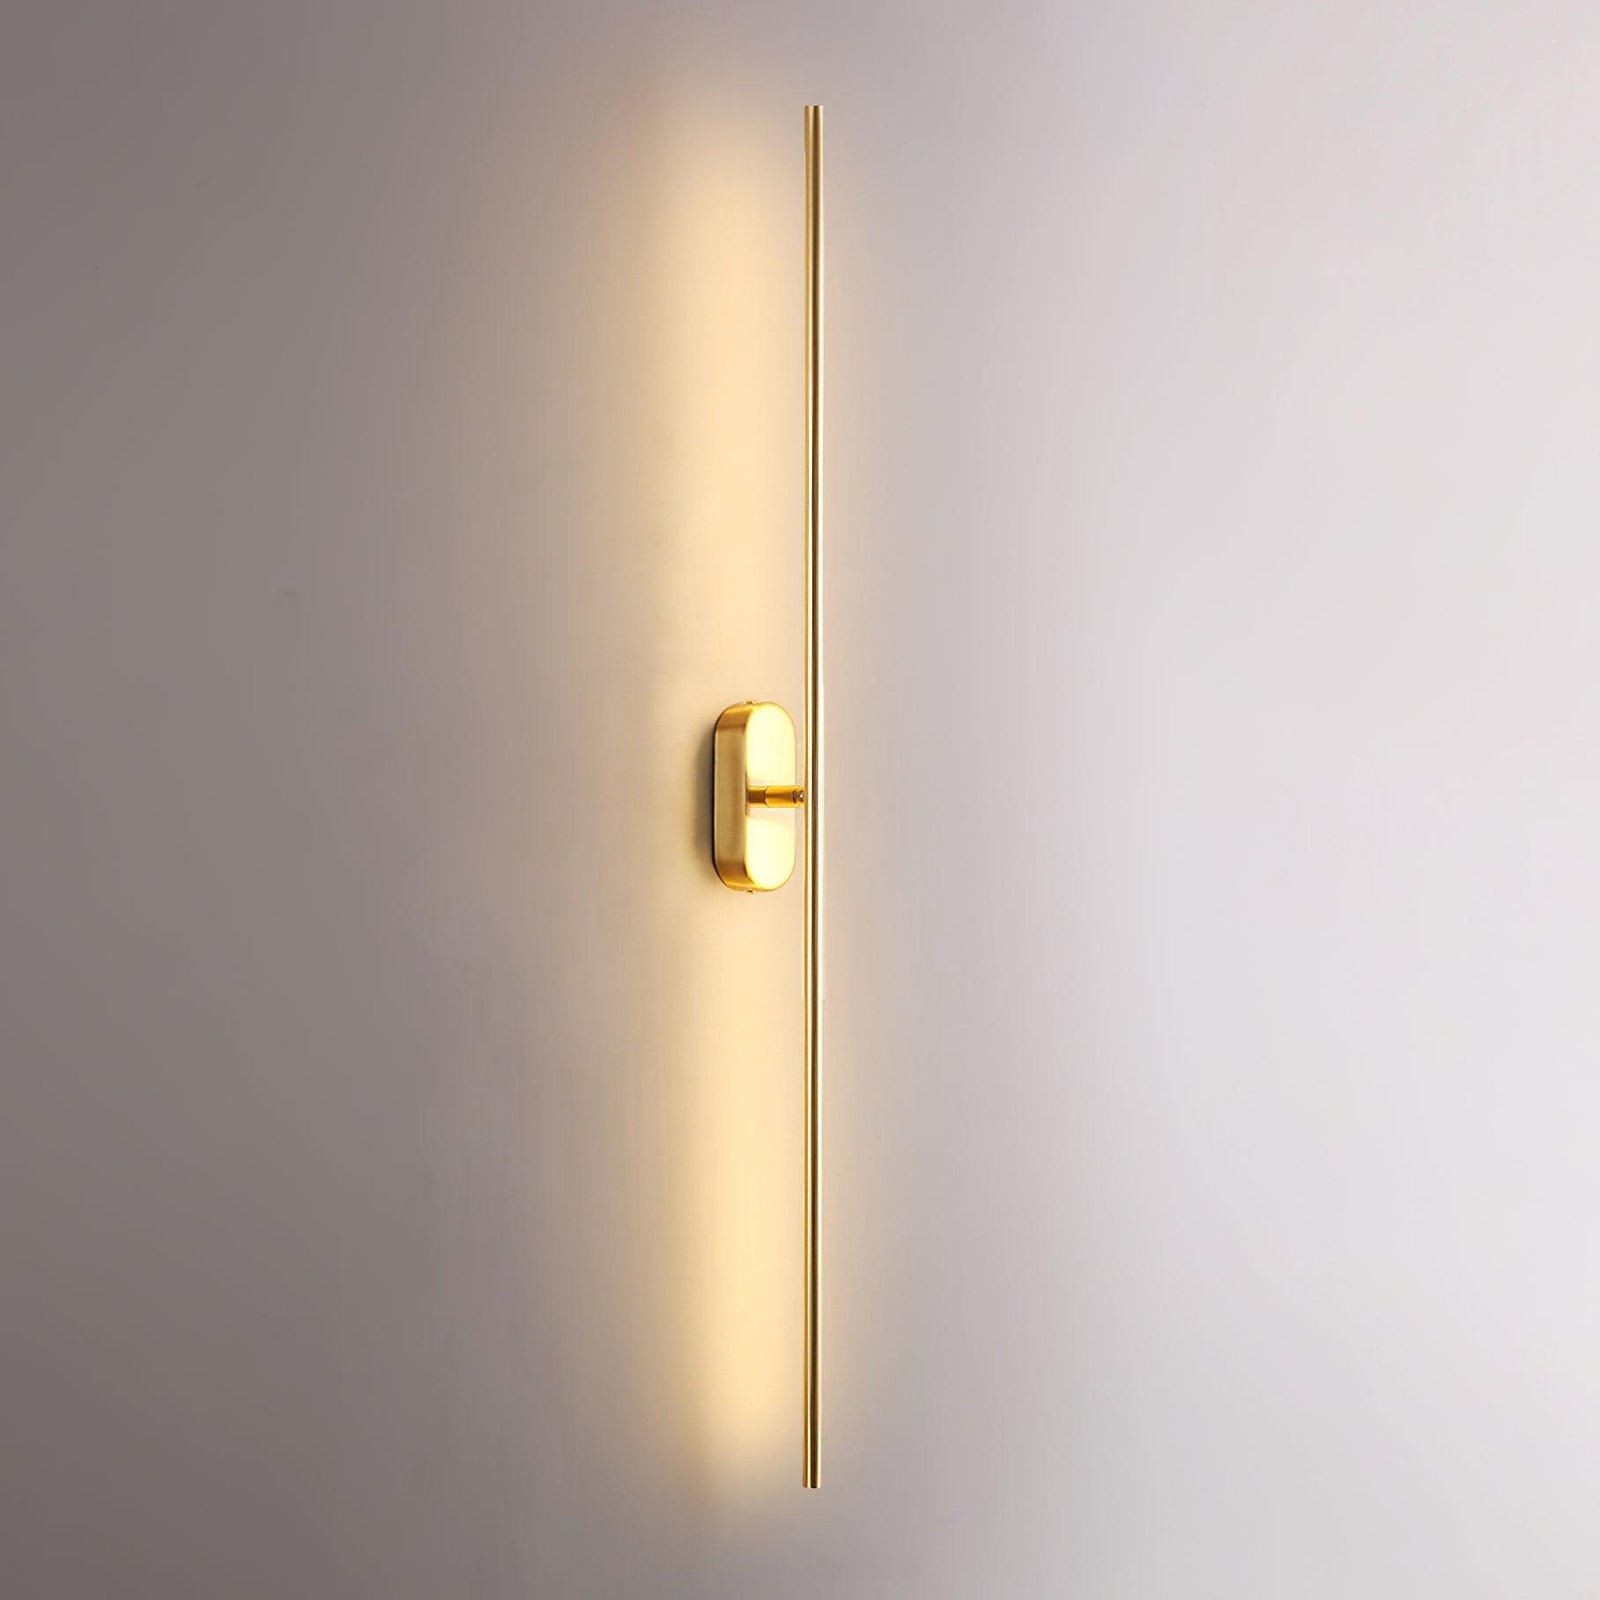 Stick Shaped Metal Sconce in Brass, Cool White - Dimensions: L 2″ x W 3.1″ x H 37.4″ (or L 5cm x W 8cm x H 95cm)